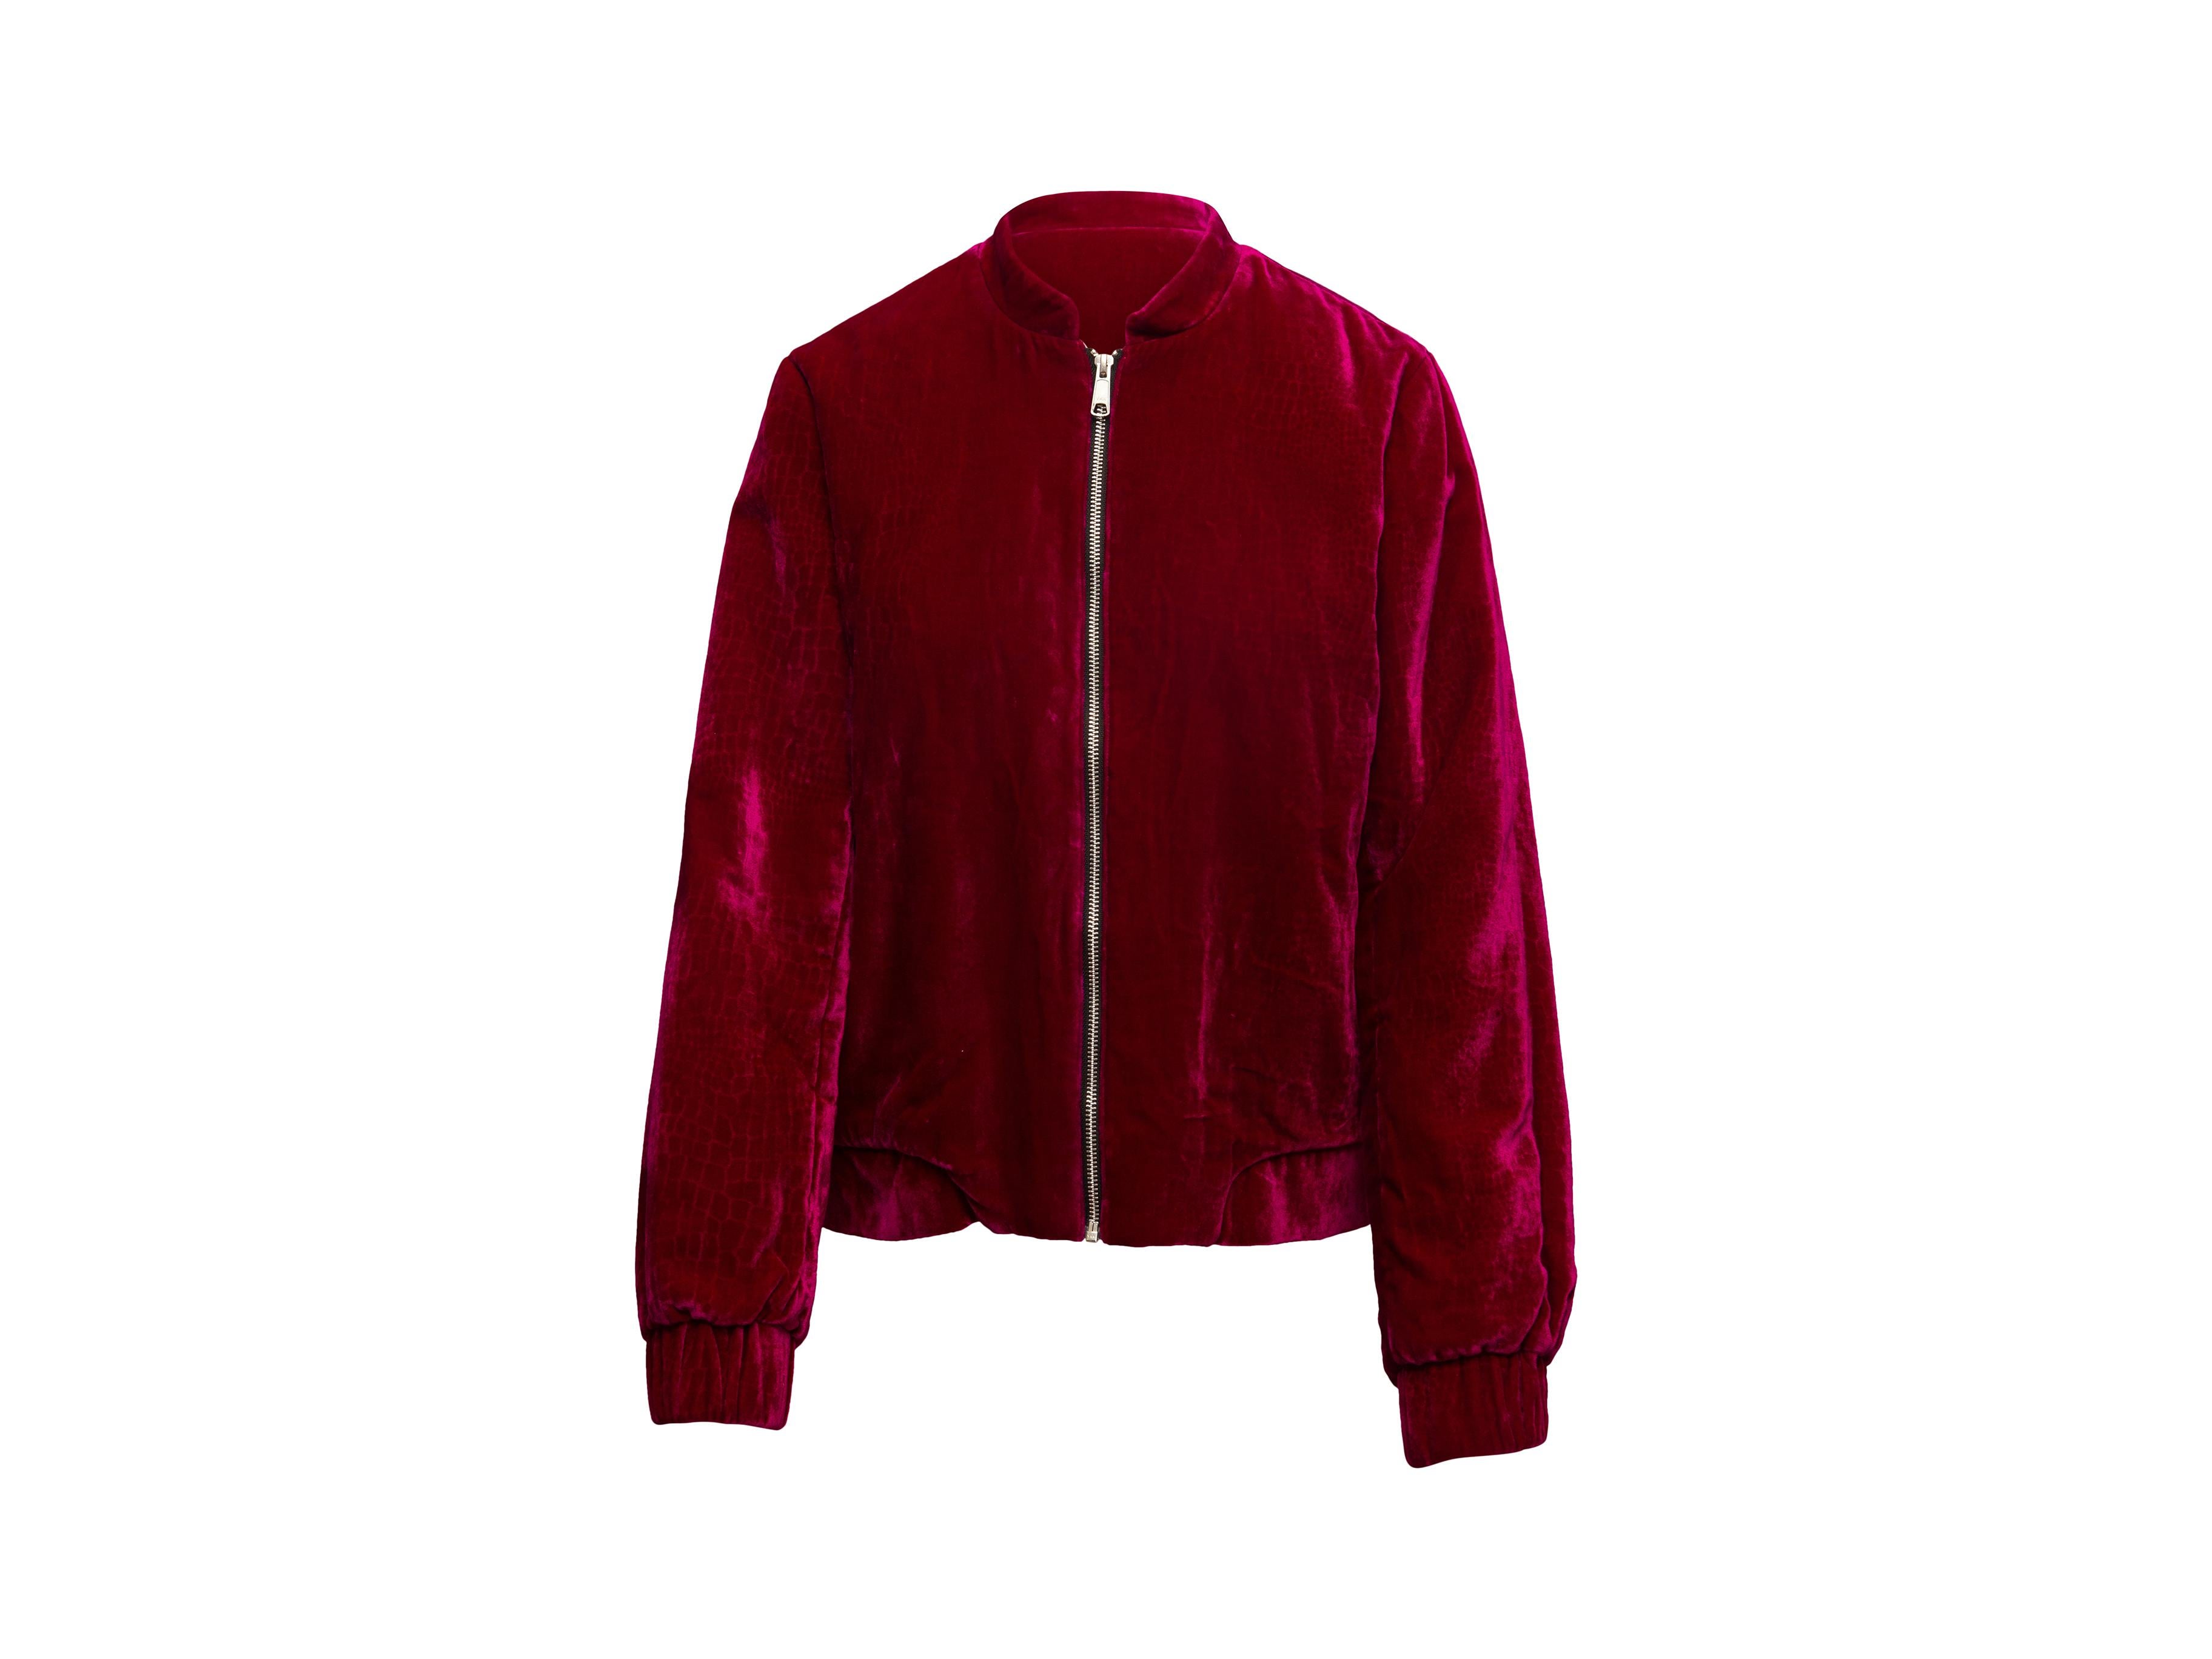 Product details: Red velvet bomber jacket by Opening Ceremony. Dual hip pockets. Zip closure at center front. 38